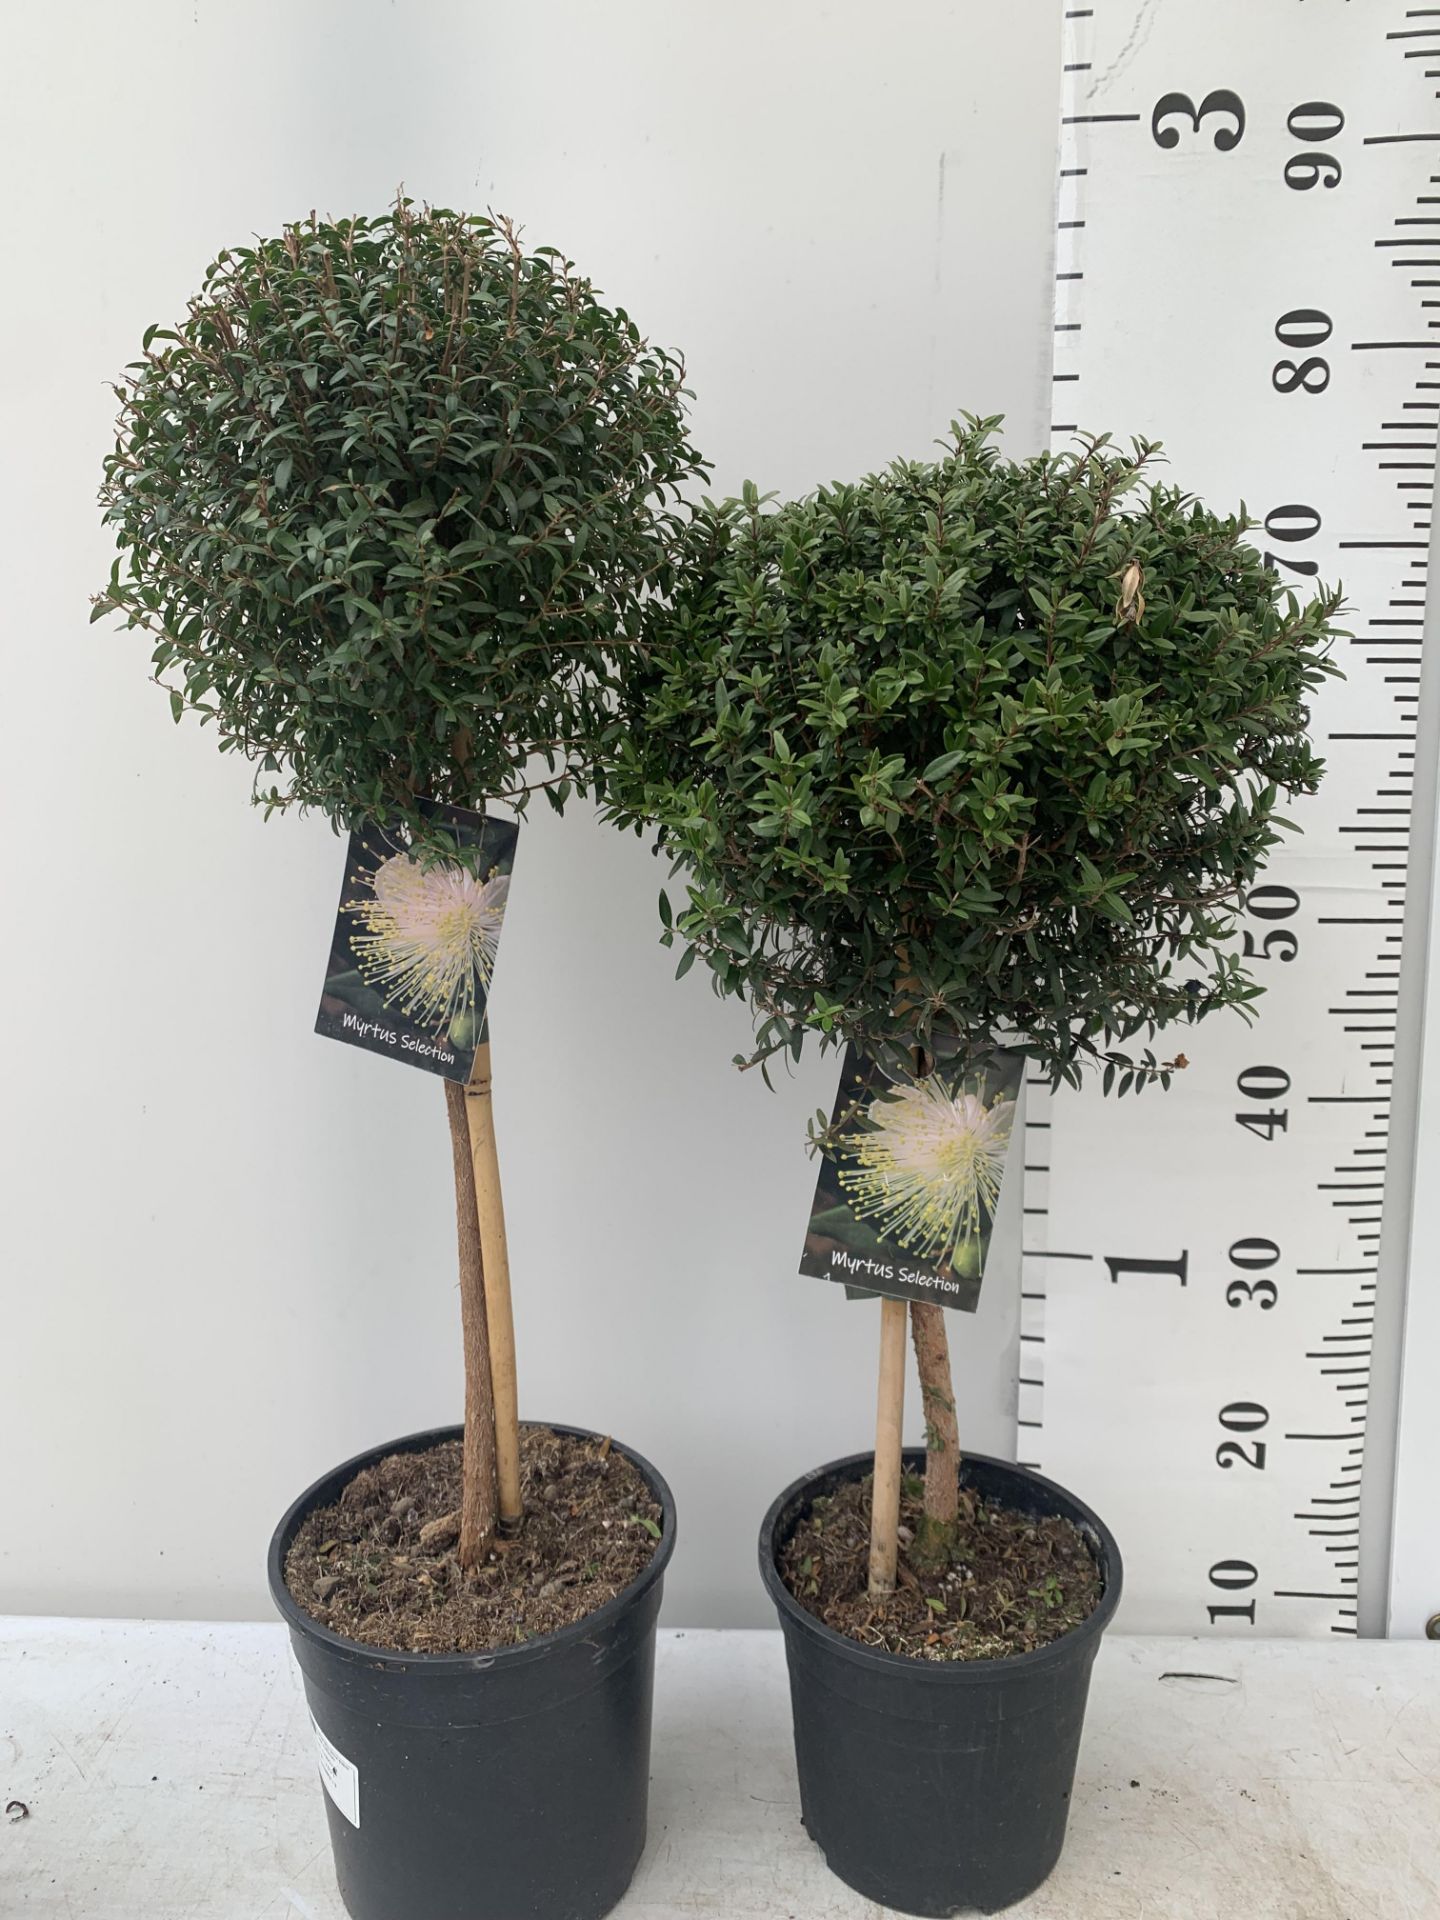 TWO MYRTUS SELECTION STANDARD TREES OF DIFFERING HEIGHTS ONE APPROX 85CM IN HEIGHT AND ONE 70CM IN 2 - Image 3 of 10